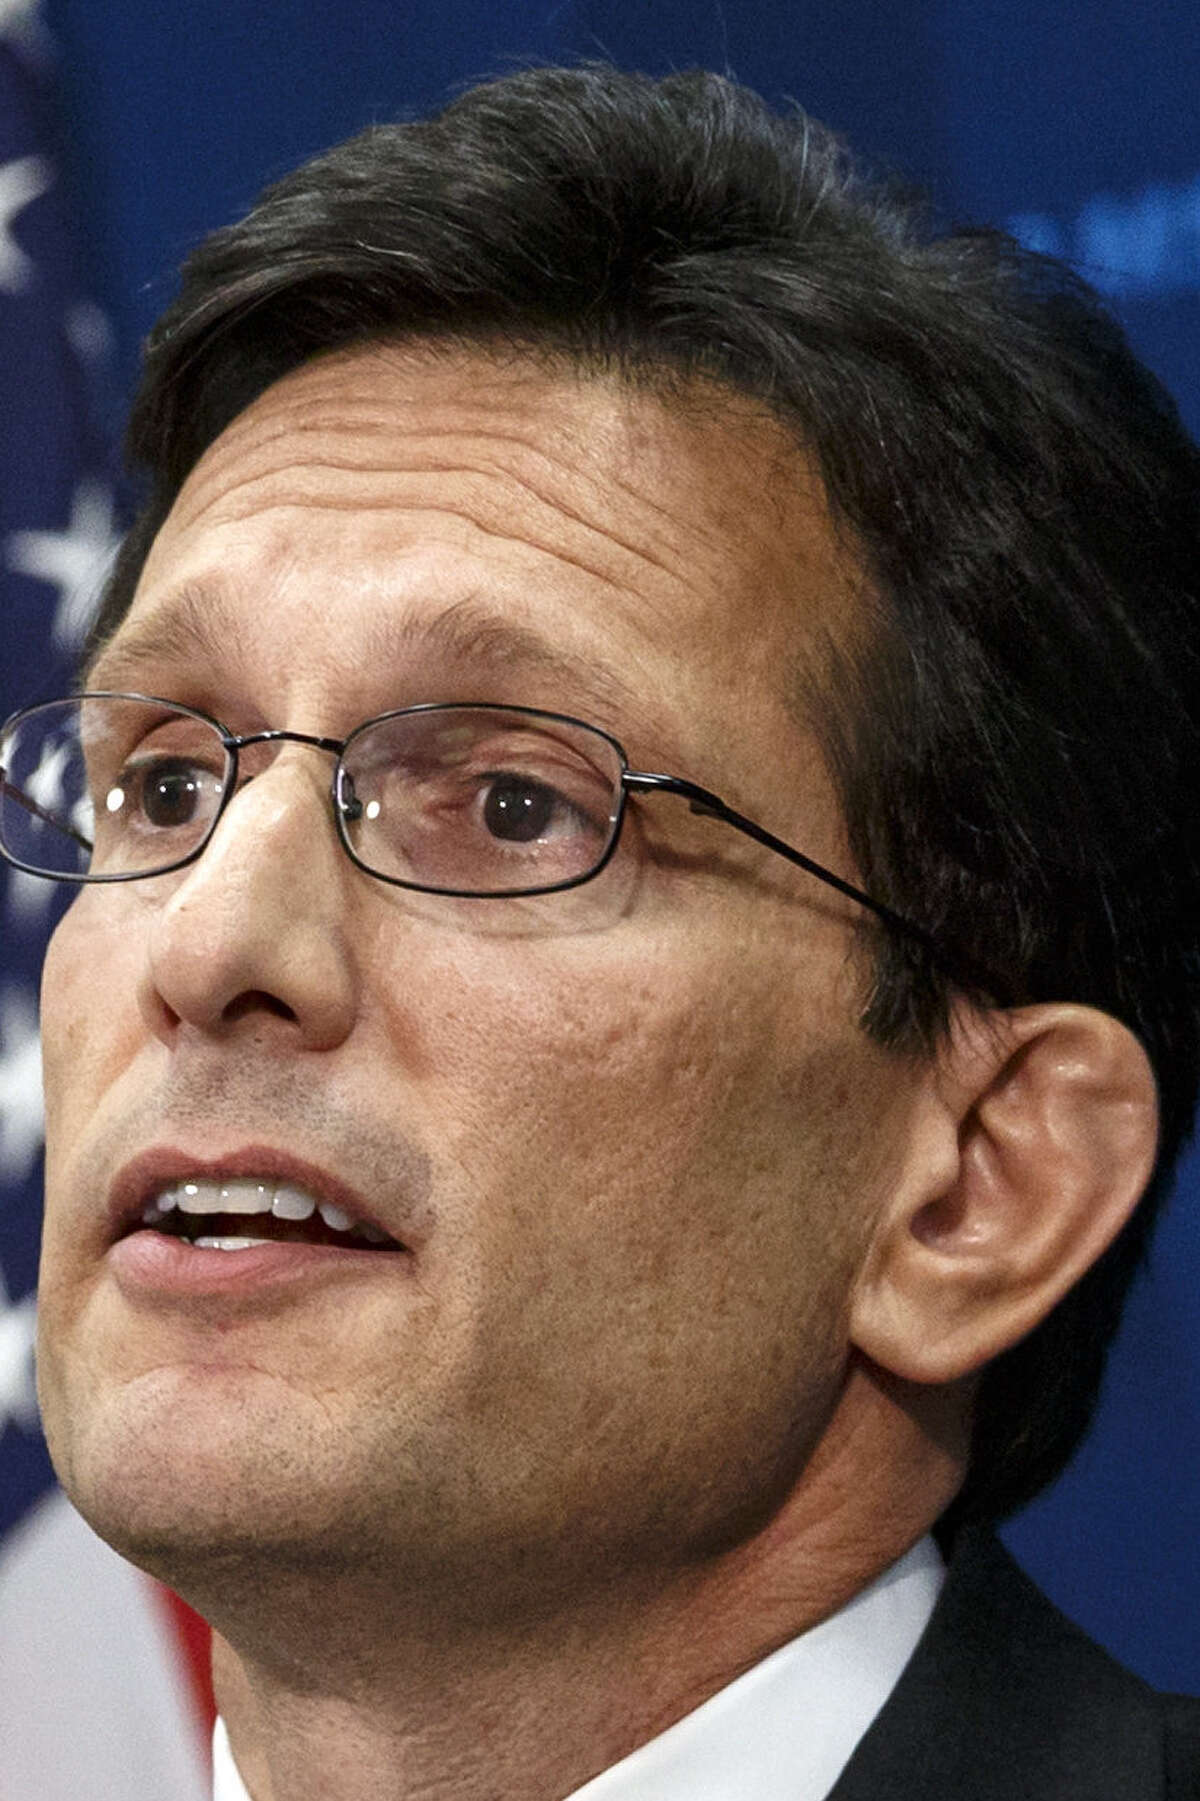 House Majority Leader Eric Cantor's defeat stunned the Republican Party.